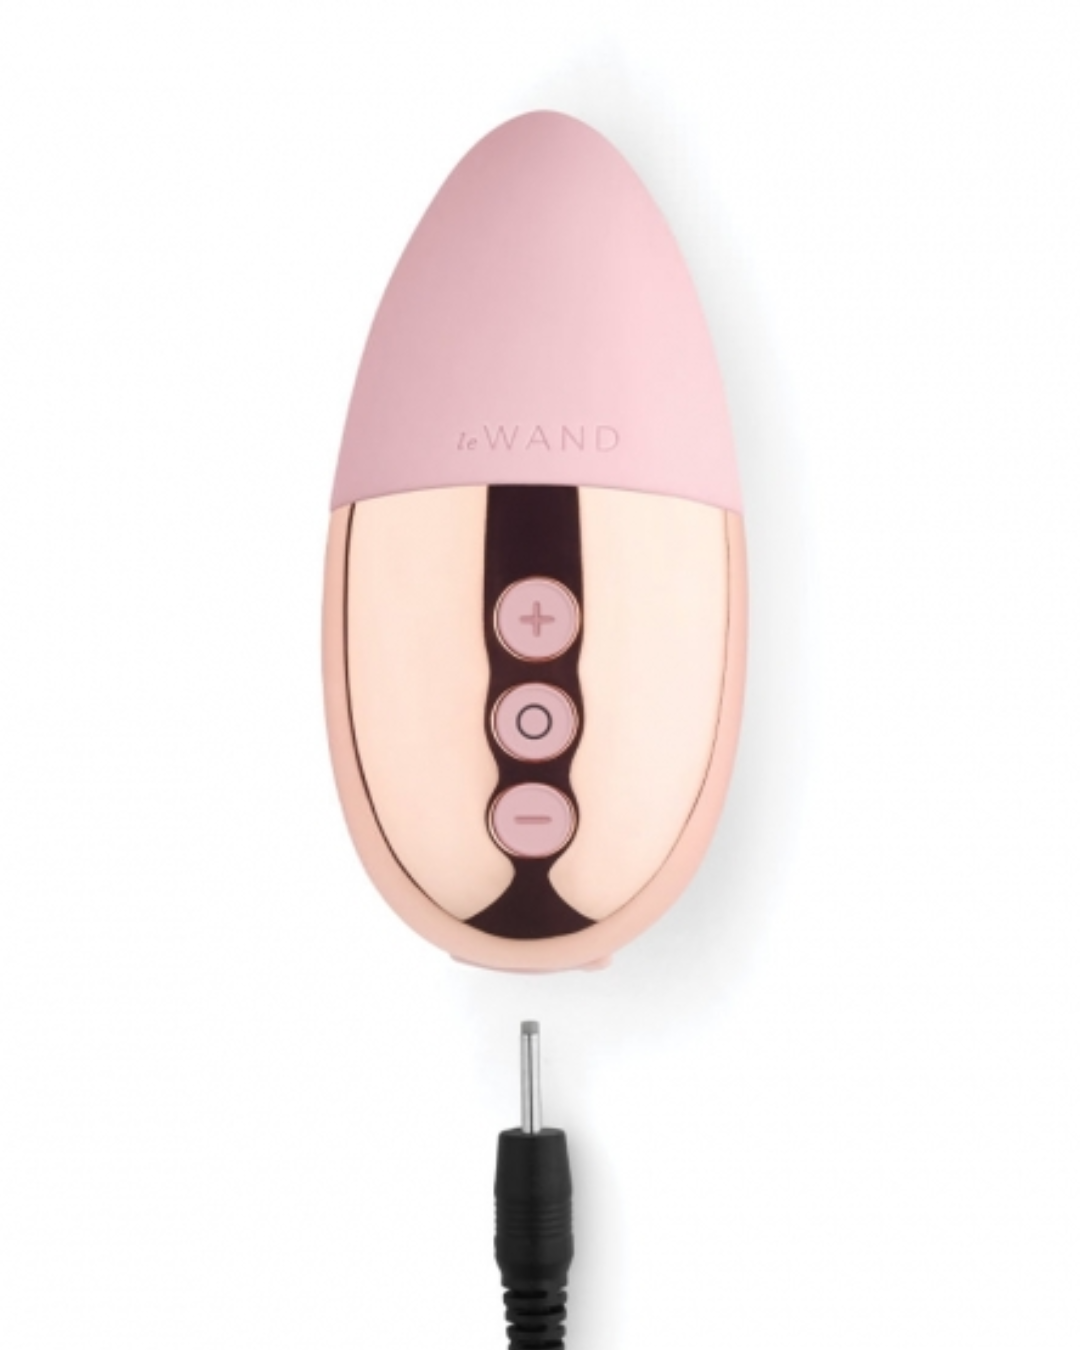 Le Wand Point Weighted Waterproof Silicone Lay-On Vibrator - Rose Gold charging\